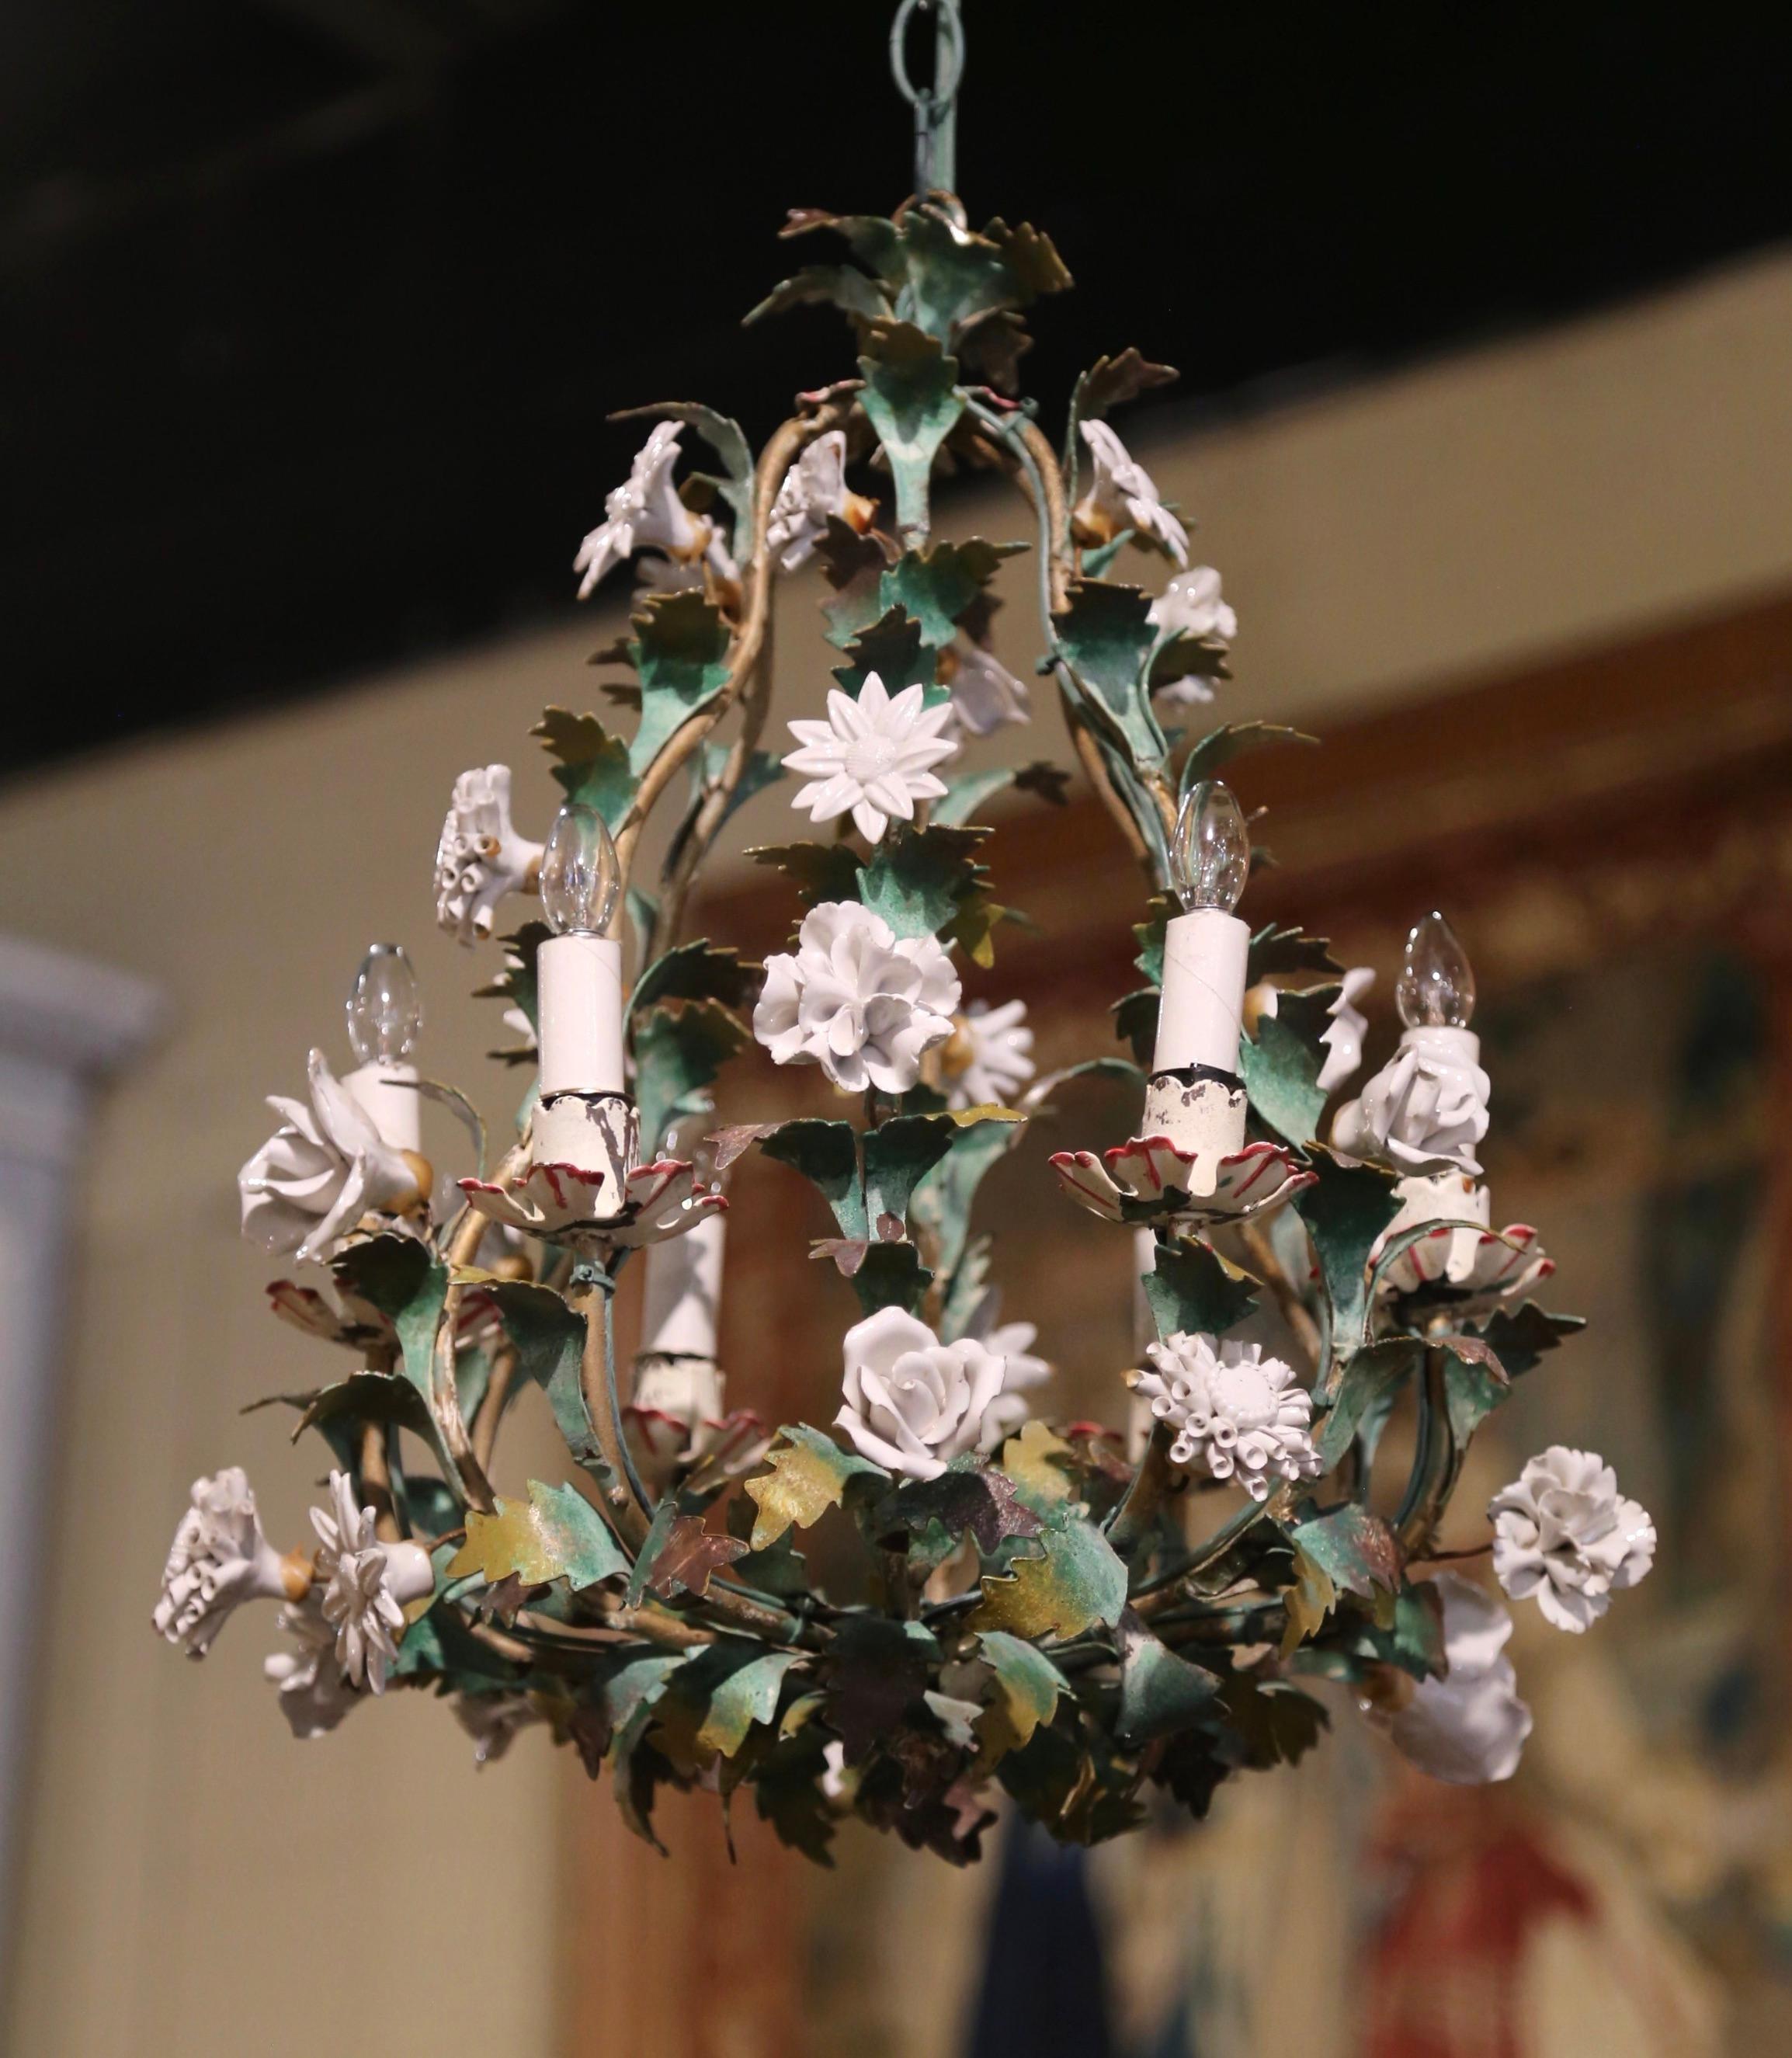 Decorate an entryway or powder room with this elegant and feminine light fixture. Crafted in France circa 1920, the petite antique chandelier is decorated with white and light pink porcelain flowers surrounded by painted green leaves. The six-light